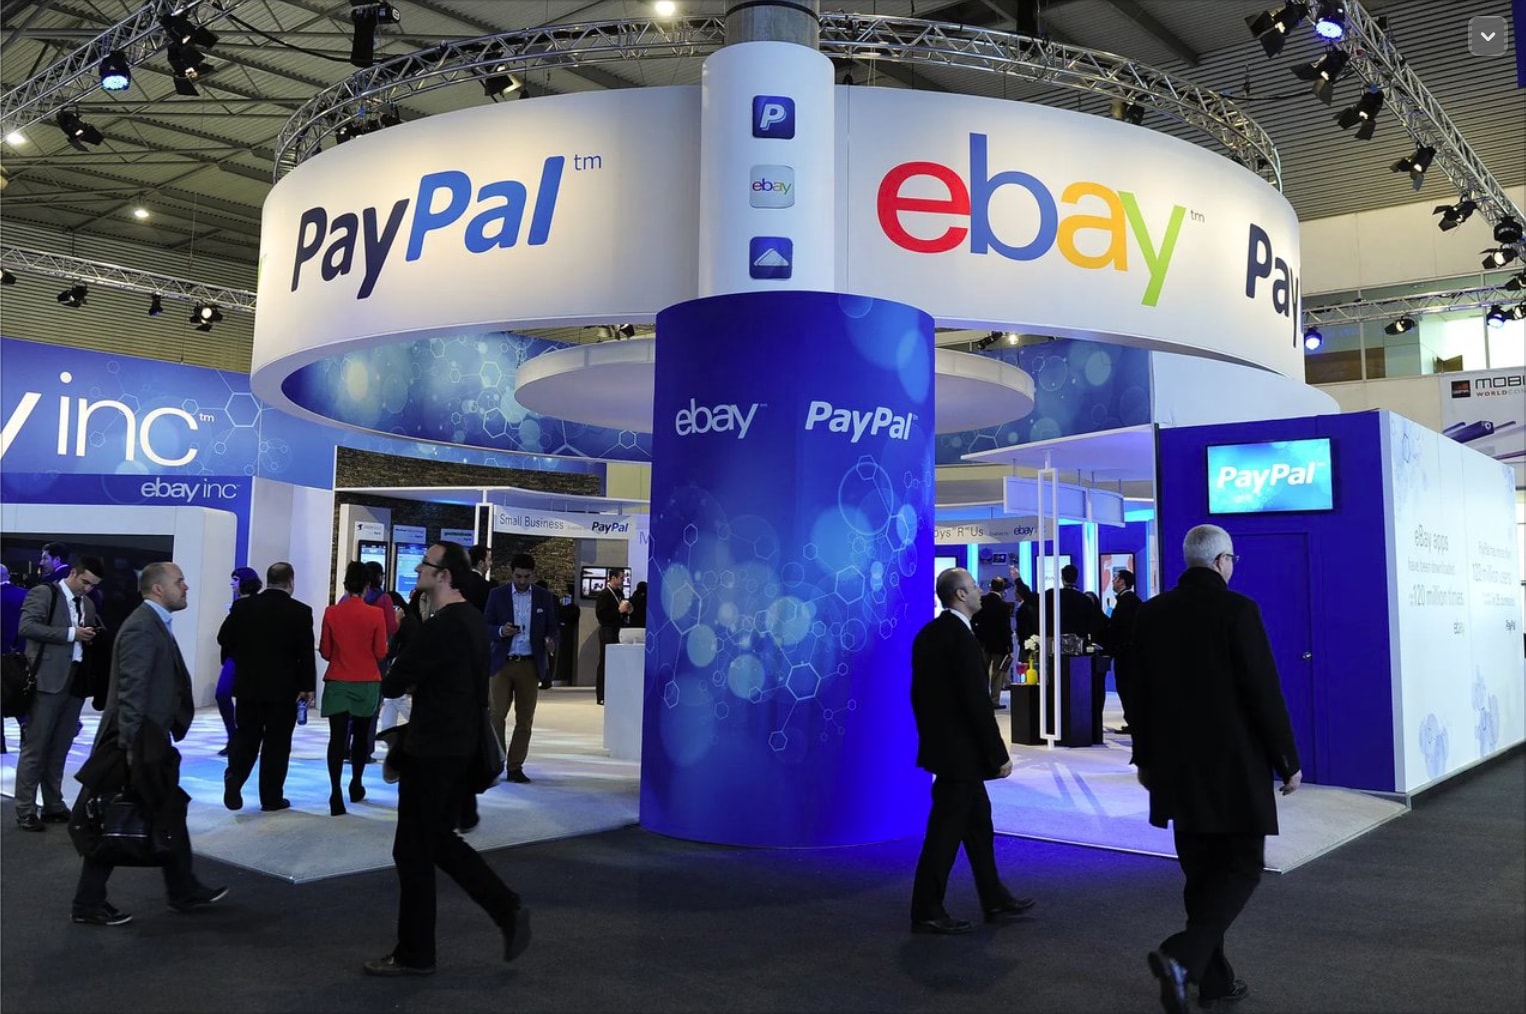 PayPal Booth at a Trade Show